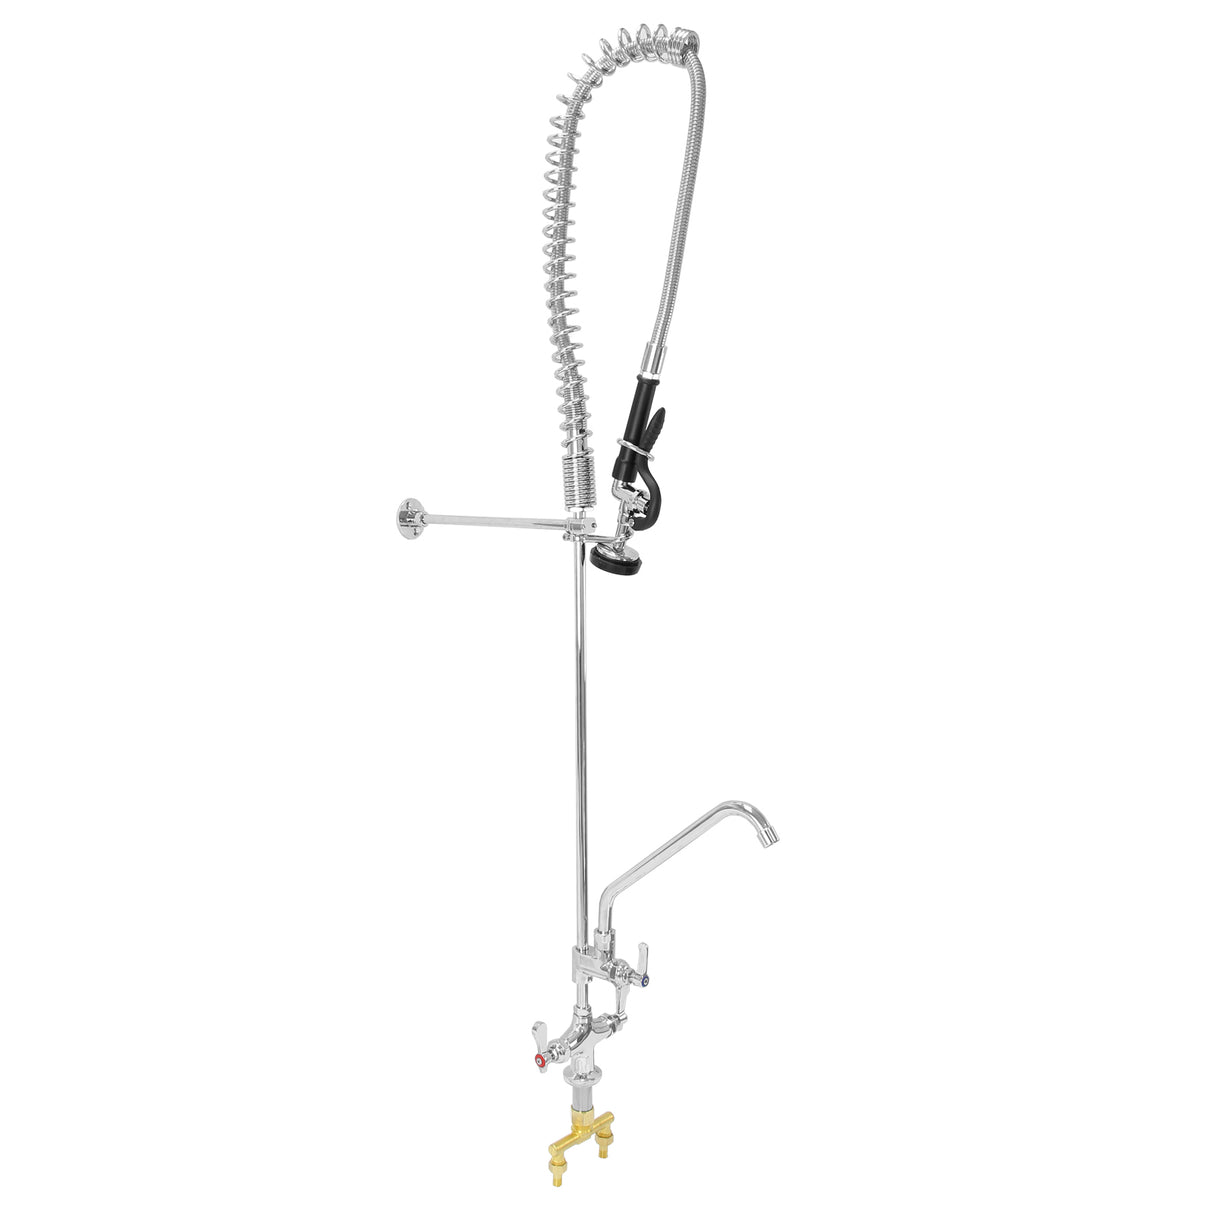 KuKoo Commercial Sink & Pre-Rinse Tap - Left Hand Drainer